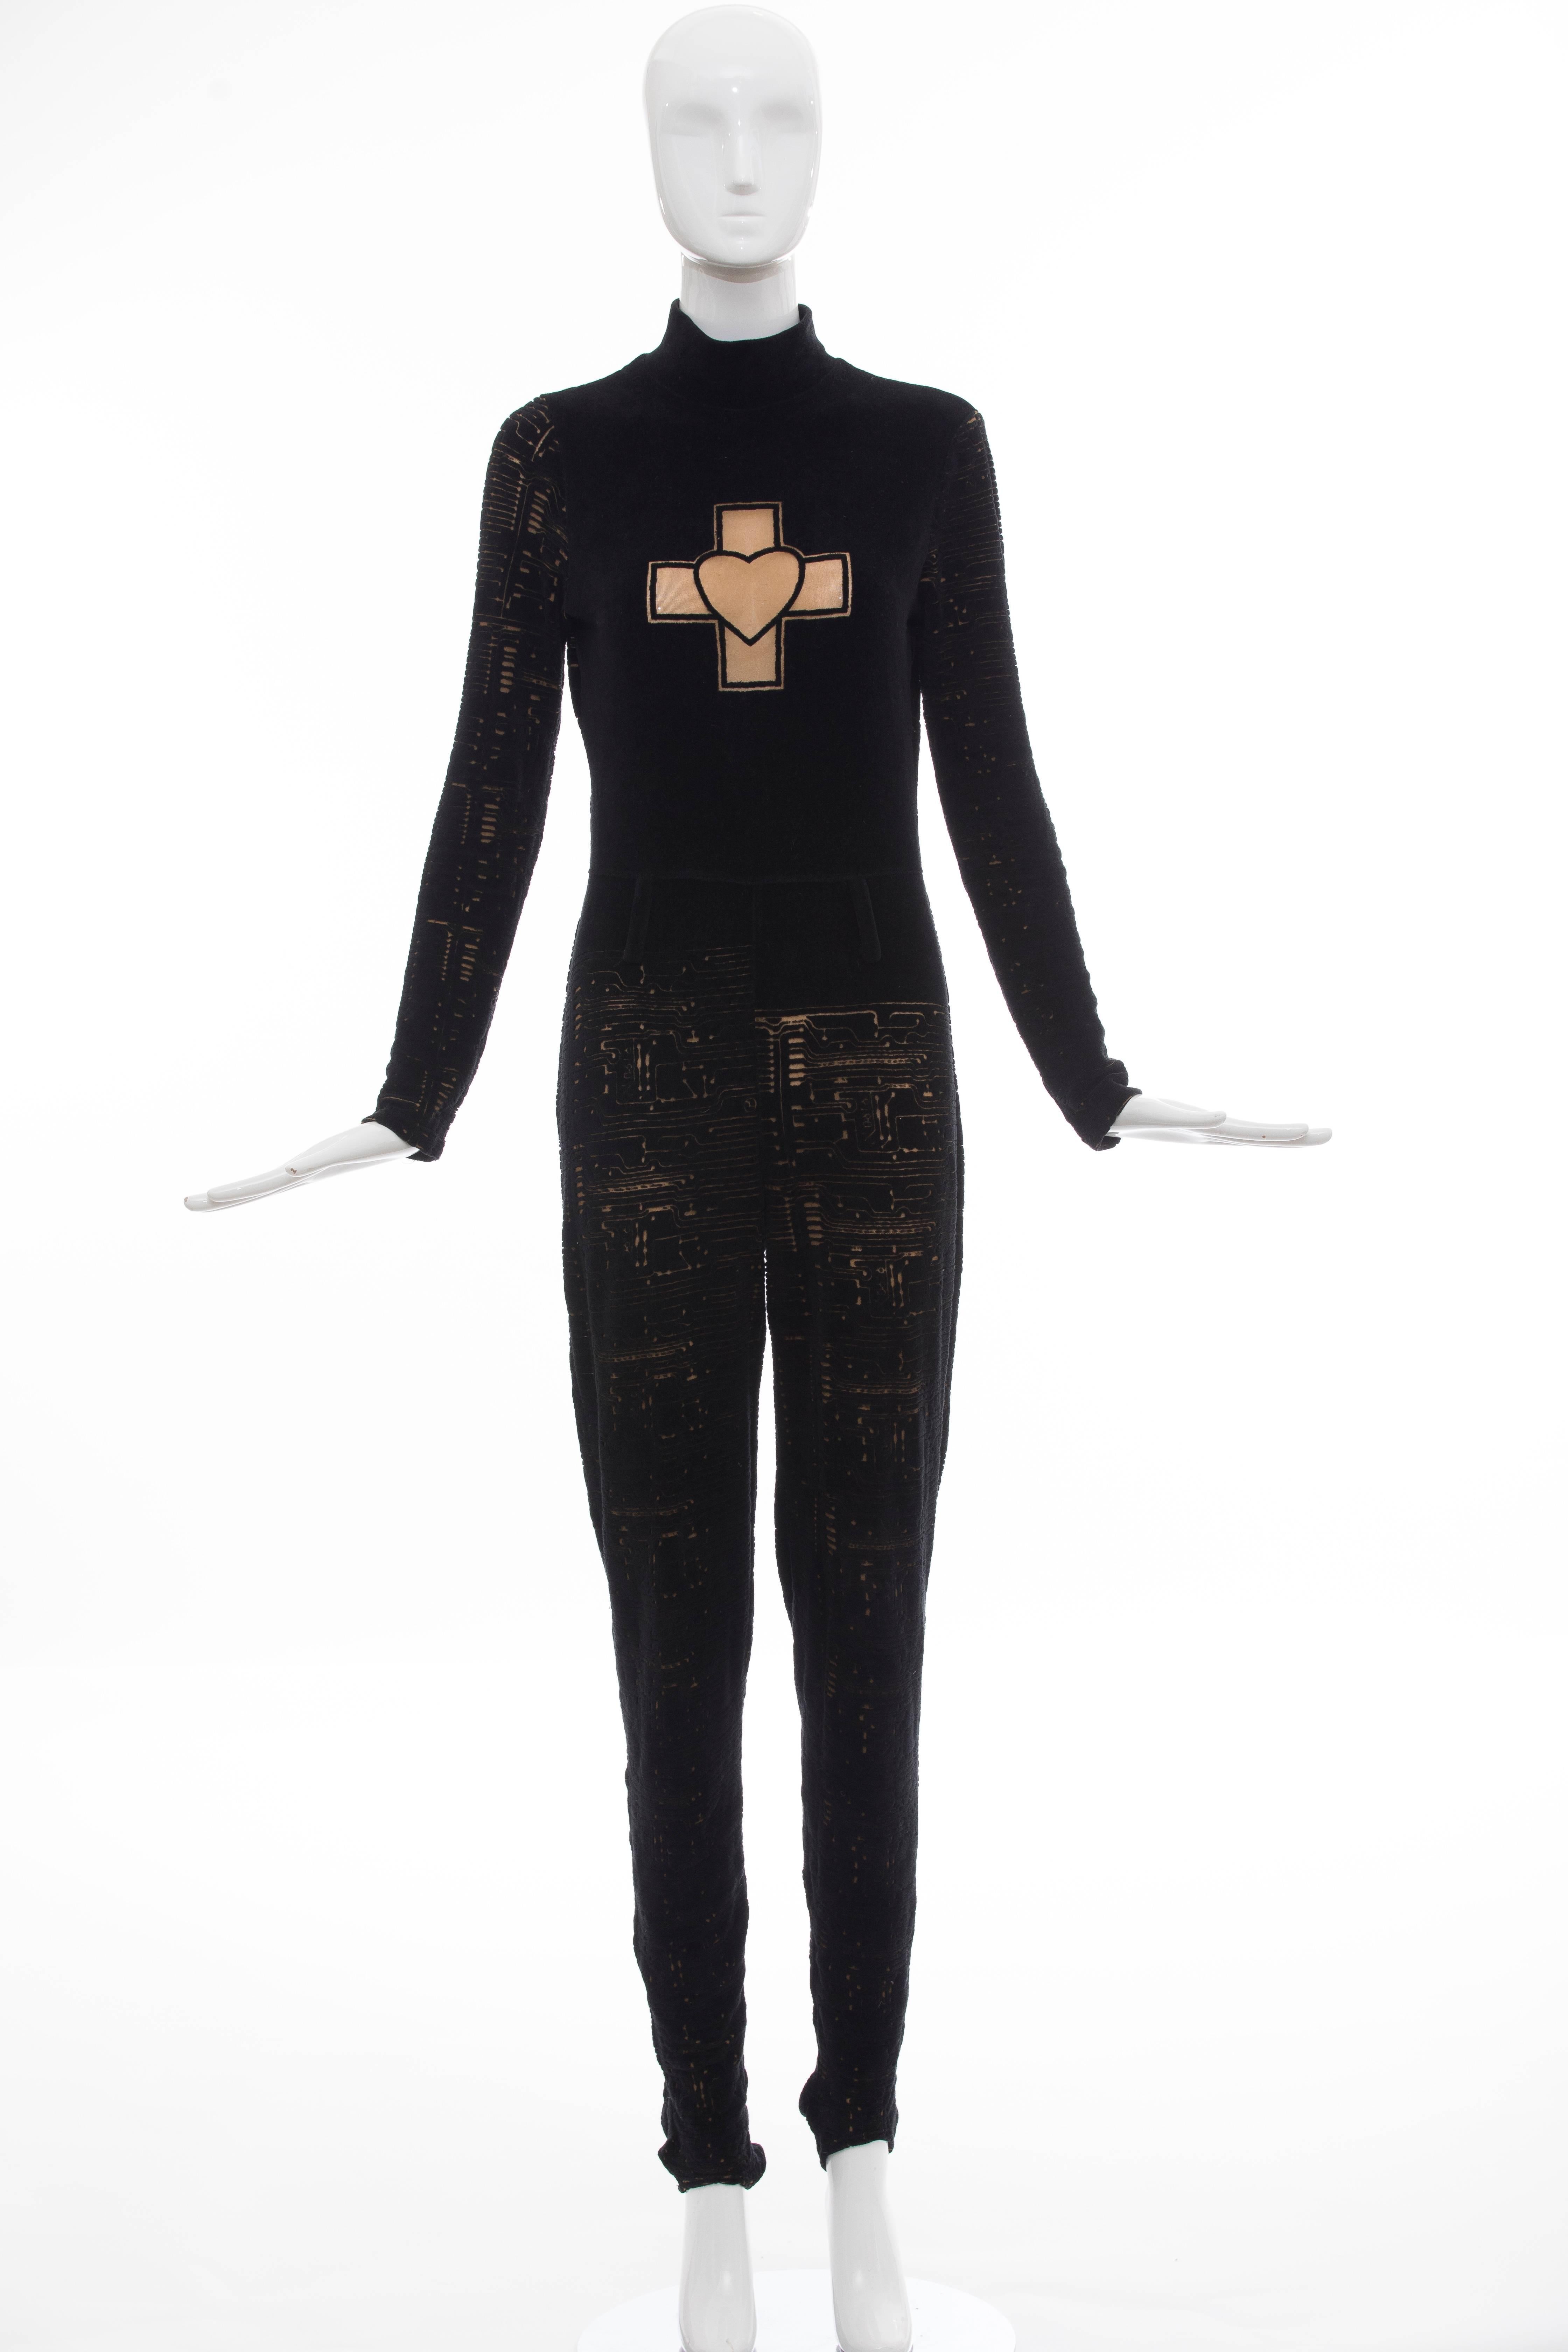 Jean Paul Gaultier, Circa 1990's black velour long sleeve jumpsuit with mock neck, devoré circuit board pattern throughout and exposed silver-tone zip closure at back. 

No Size Label

Bust: 34, Waist 27, Hip 34, Rise 12, Inseam 34.5, Leg Opening 9
